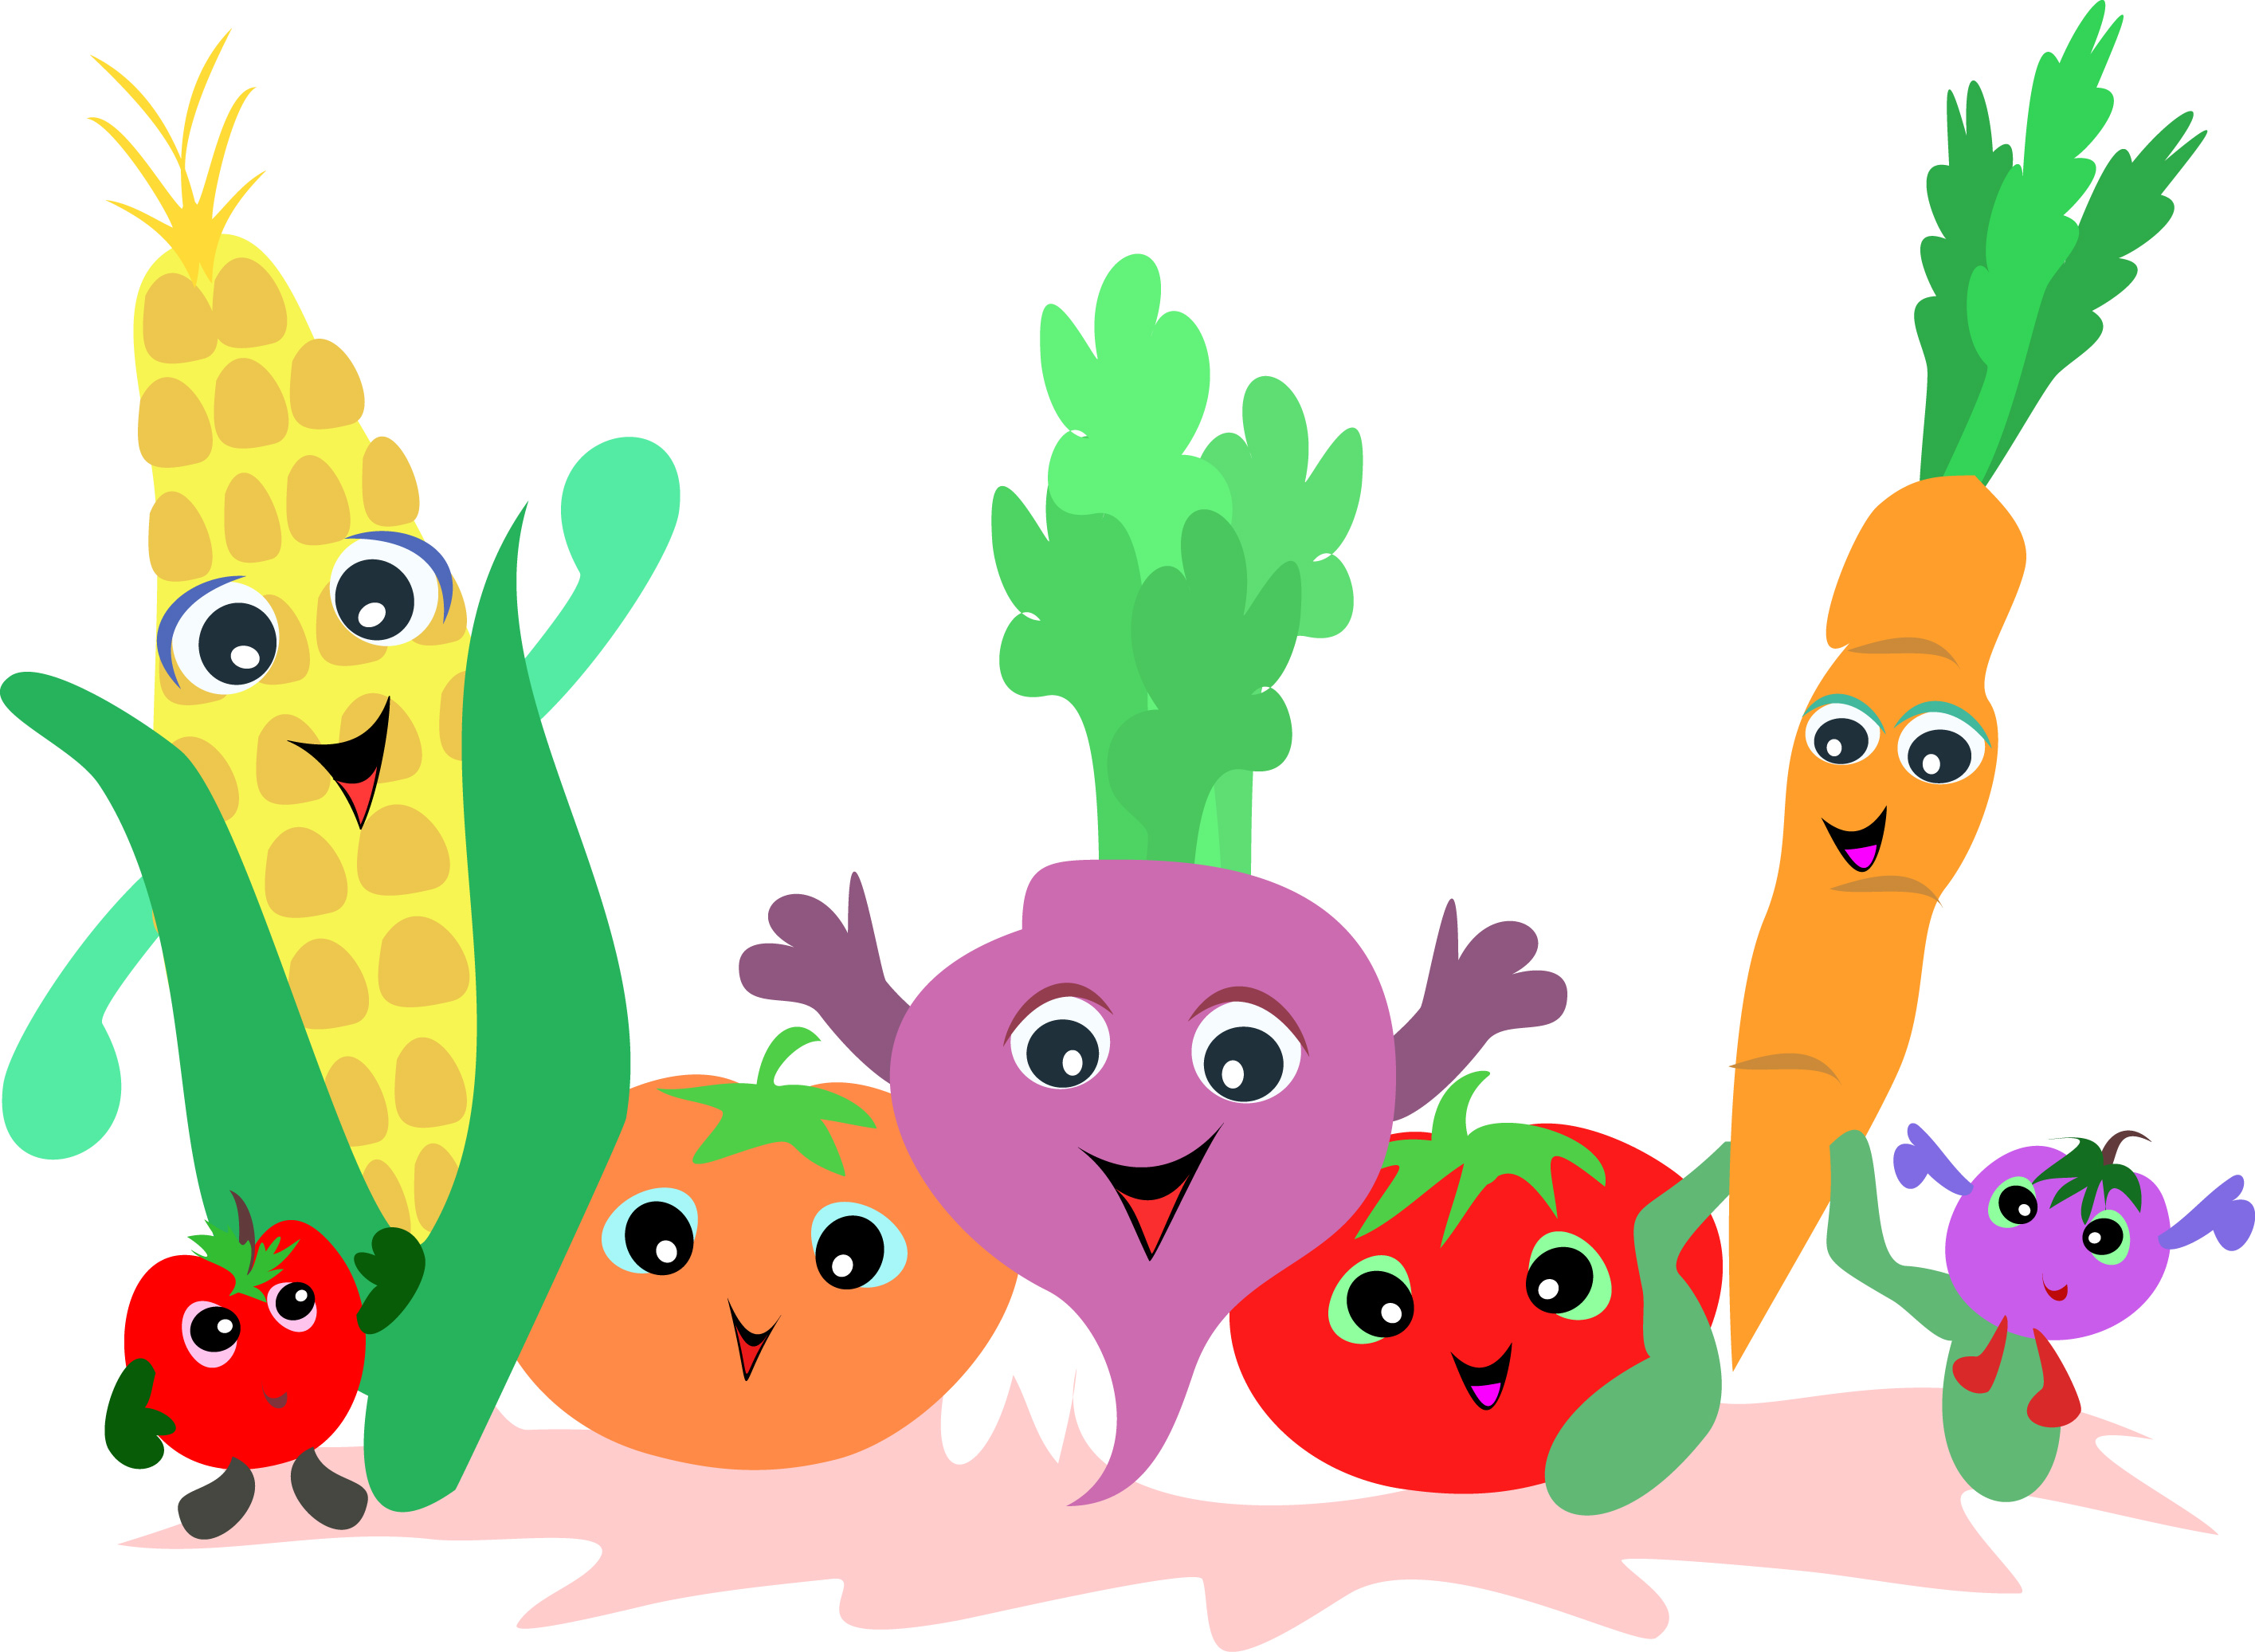 Fruit and vegetable clip art free